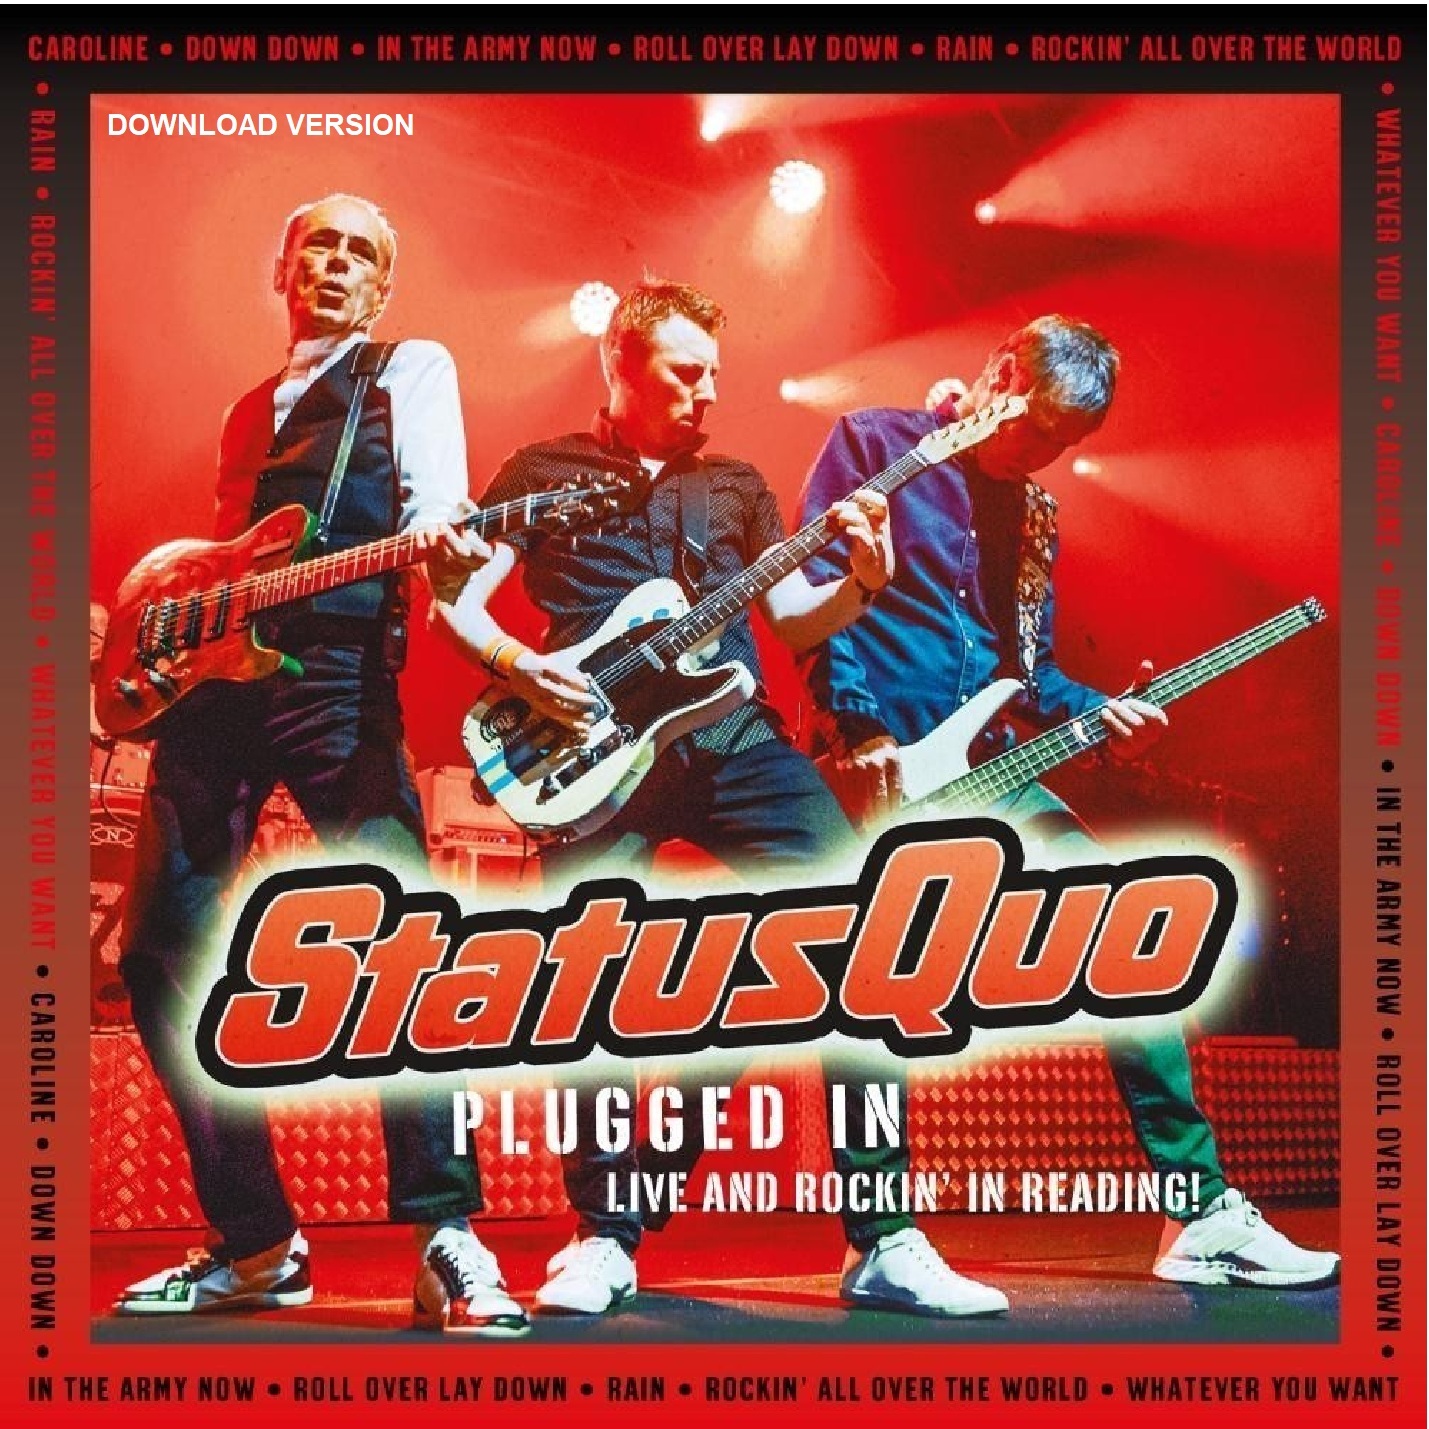 STATUS QUO ONLINE GIGOGRAPHY - Plugged In Tour 2017/18
